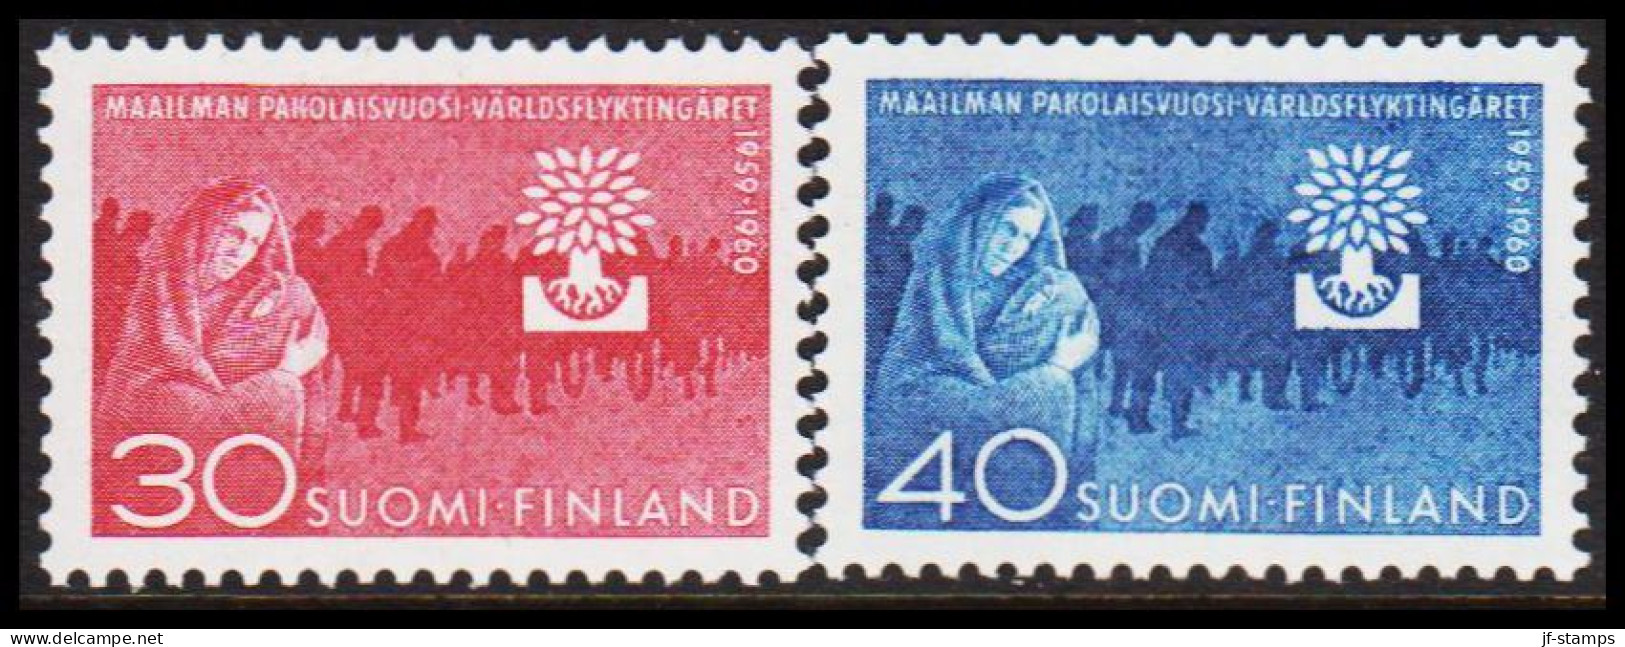 1960. FINLAND. World Refugfee Year Complete Set, NEVER HINGED. (Michel 517-518) - JF540567 - Unused Stamps